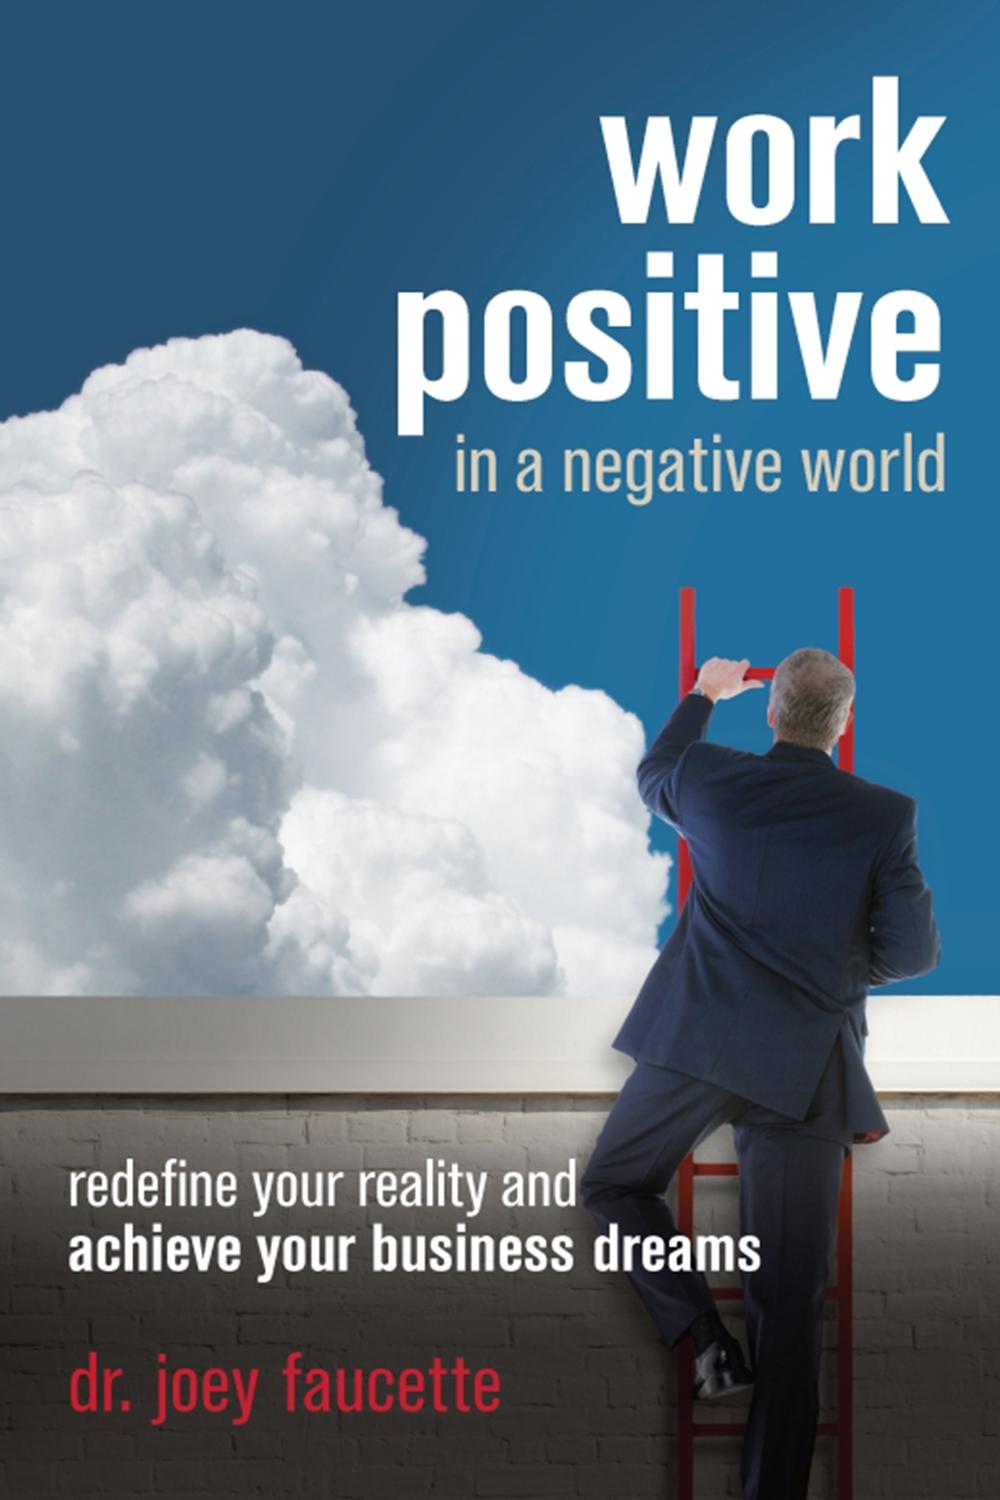 Work Positive in a Negative World - Joey Faucette